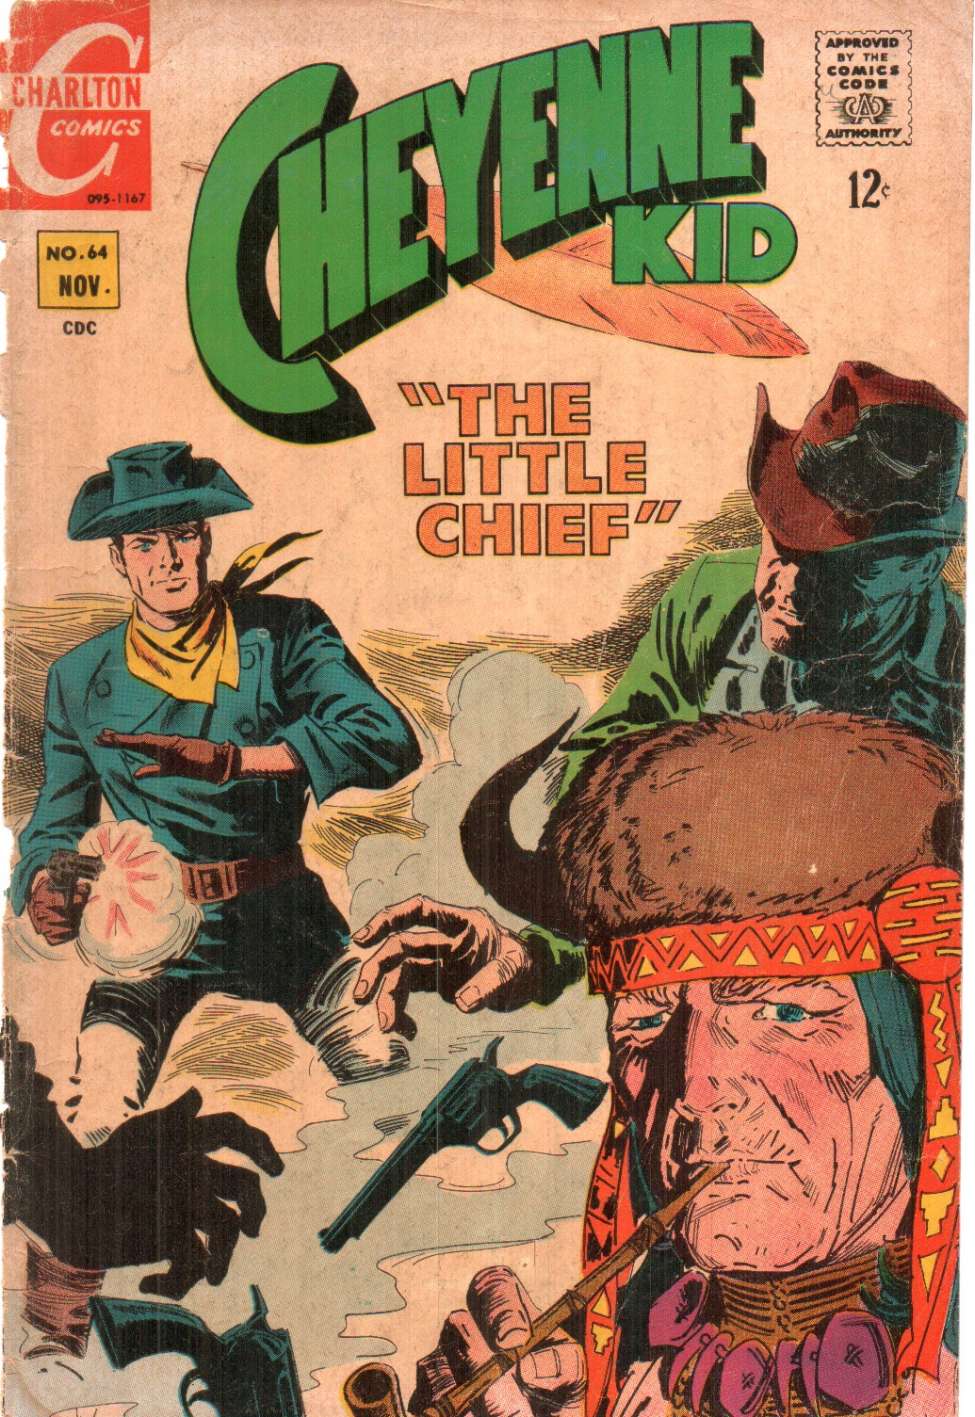 Book Cover For Cheyenne Kid 64 - Version 1